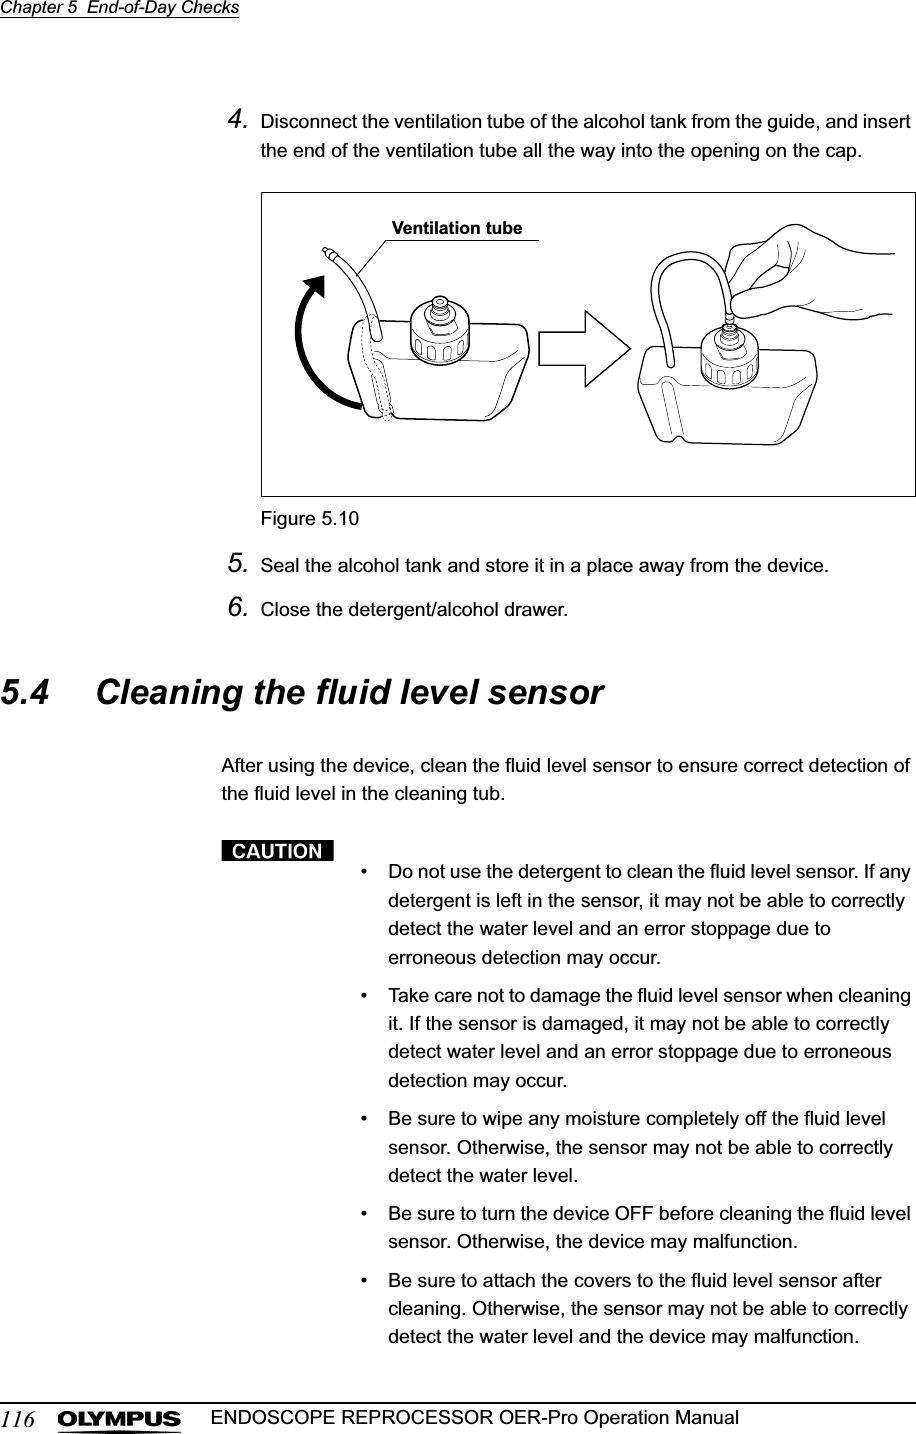 116Chapter 5  End-of-Day ChecksENDOSCOPE REPROCESSOR OER-Pro Operation Manual4. Disconnect the ventilation tube of the alcohol tank from the guide, and insert the end of the ventilation tube all the way into the opening on the cap.Figure 5.105. Seal the alcohol tank and store it in a place away from the device.6. Close the detergent/alcohol drawer.5.4 Cleaning the fluid level sensorAfter using the device, clean the fluid level sensor to ensure correct detection of the fluid level in the cleaning tub.• Do not use the detergent to clean the fluid level sensor. If any detergent is left in the sensor, it may not be able to correctly detect the water level and an error stoppage due to erroneous detection may occur.• Take care not to damage the fluid level sensor when cleaning it. If the sensor is damaged, it may not be able to correctly detect water level and an error stoppage due to erroneous detection may occur.• Be sure to wipe any moisture completely off the fluid level sensor. Otherwise, the sensor may not be able to correctly detect the water level.• Be sure to turn the device OFF before cleaning the fluid level sensor. Otherwise, the device may malfunction.• Be sure to attach the covers to the fluid level sensor after cleaning. Otherwise, the sensor may not be able to correctly detect the water level and the device may malfunction.Ventilation tube